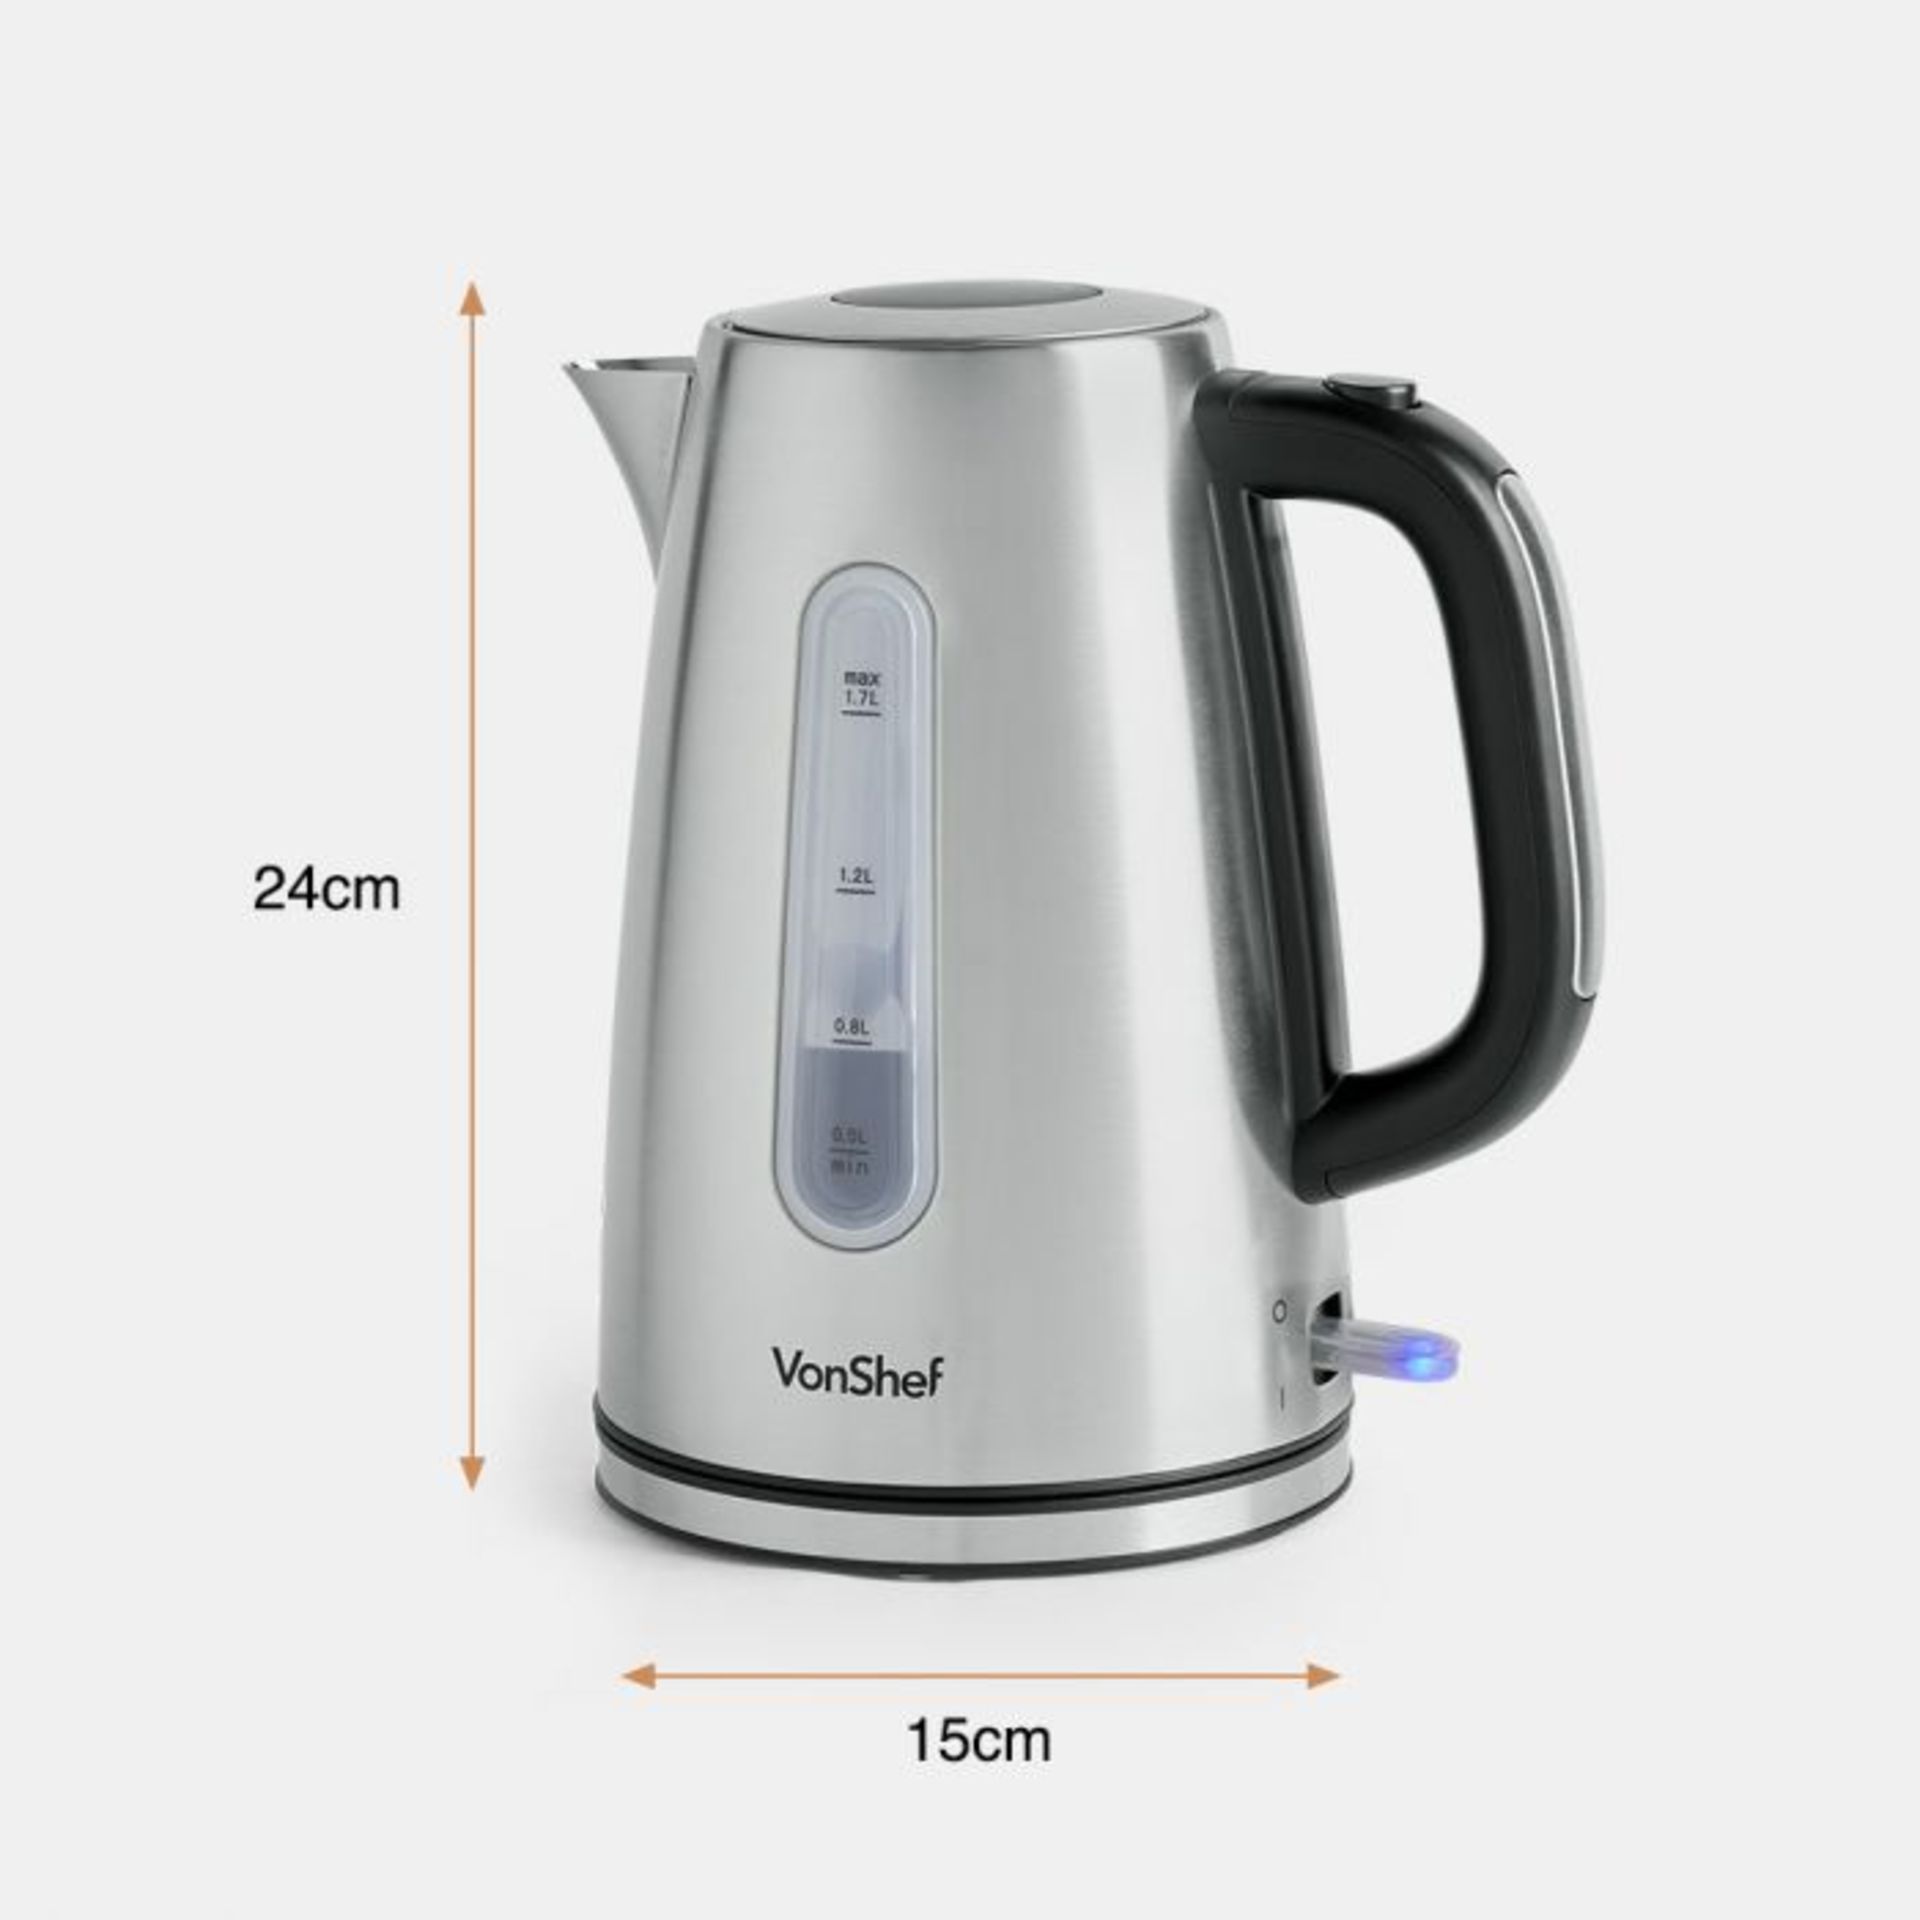 (V316) 1.7L Stainless Steel Kettle Quick boil time: 1.7L/7 cups in 5 minutes Easily remove th... - Image 2 of 4